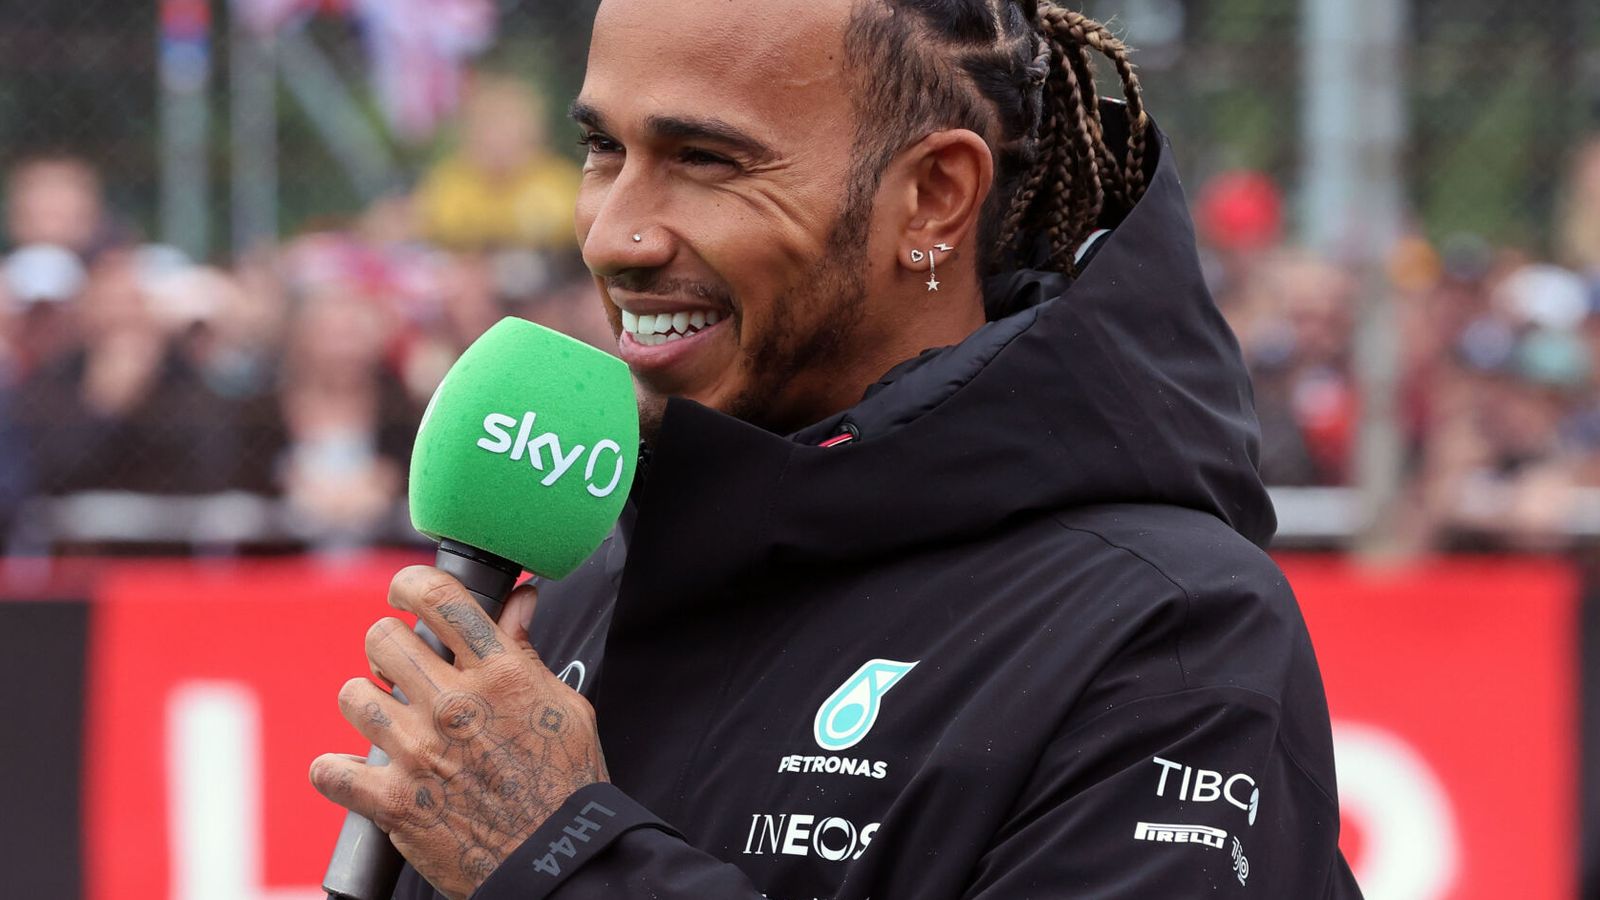 Lewis Hamilton exclusive: 'I'm going to rise again' after 'painful' Abu Dhabi and F1 2022 struggles